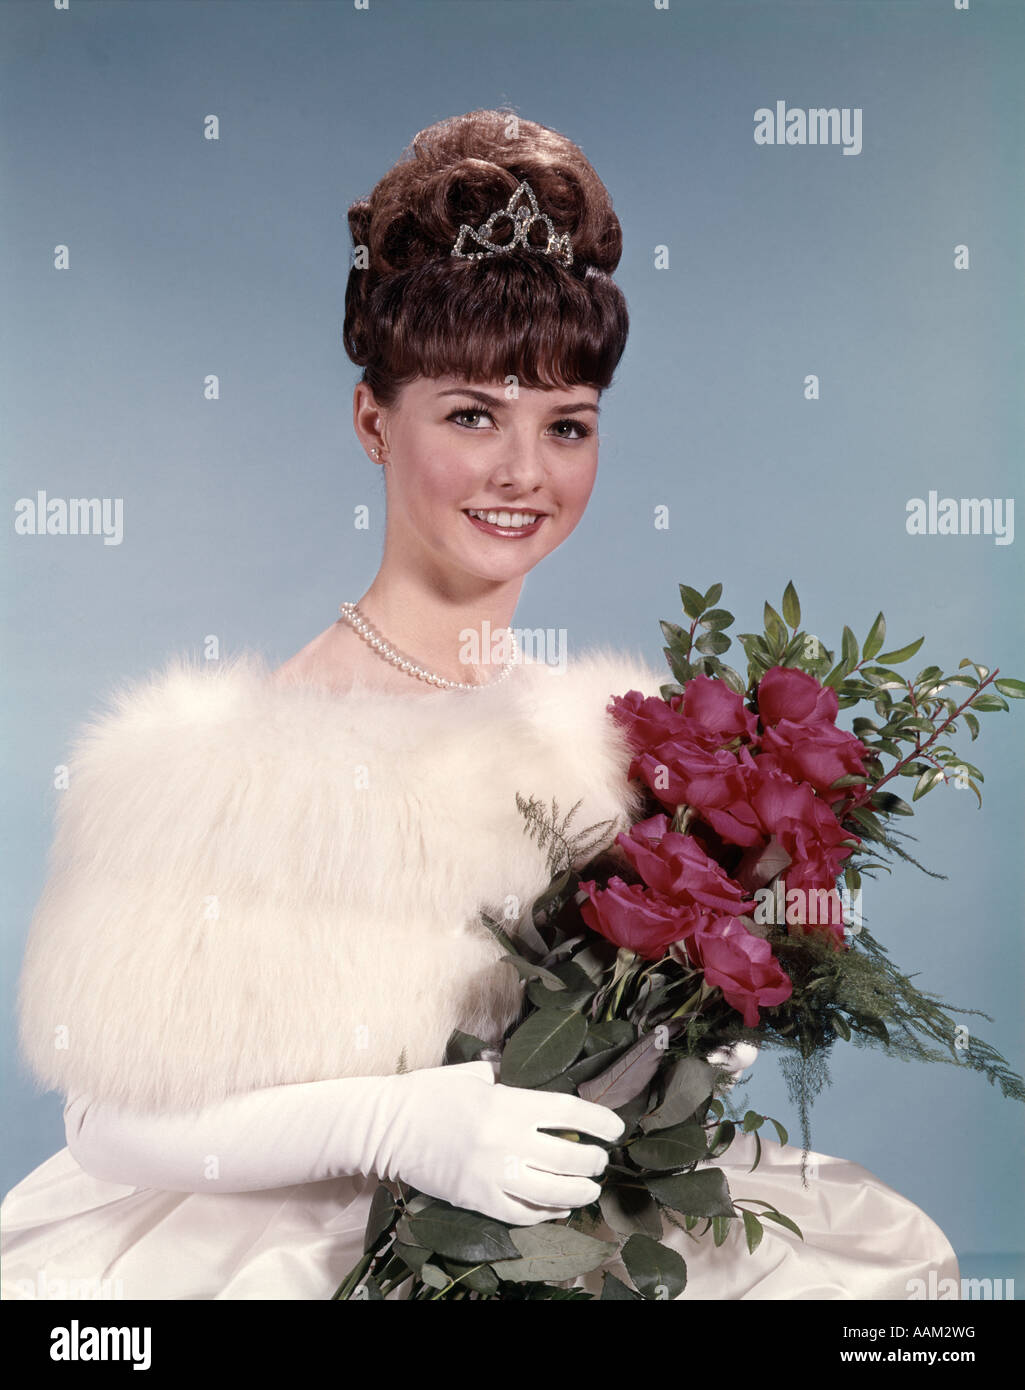 1960s YOUNG WOMAN WEARING CROWN WHITE FUR STOLE GLOVES HOLDING BOUQUET OF RED ROSES Stock Photo